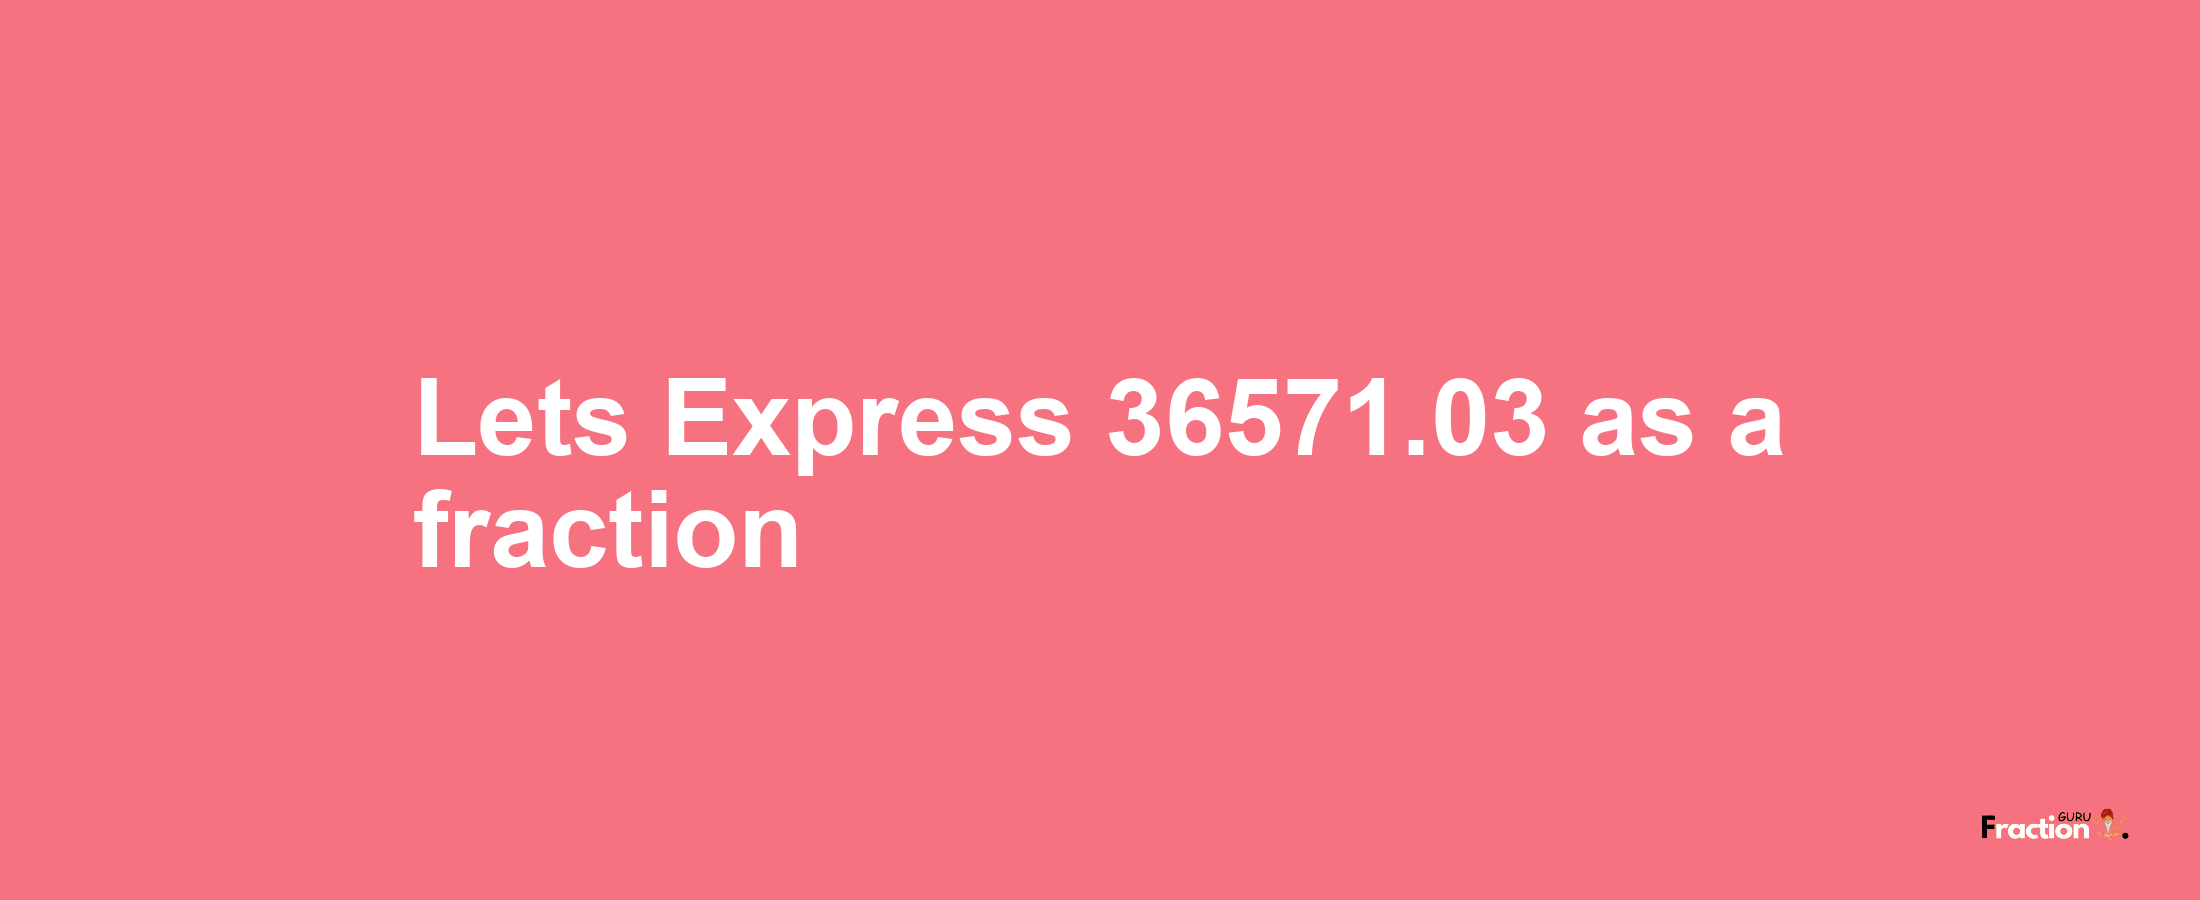 Lets Express 36571.03 as afraction